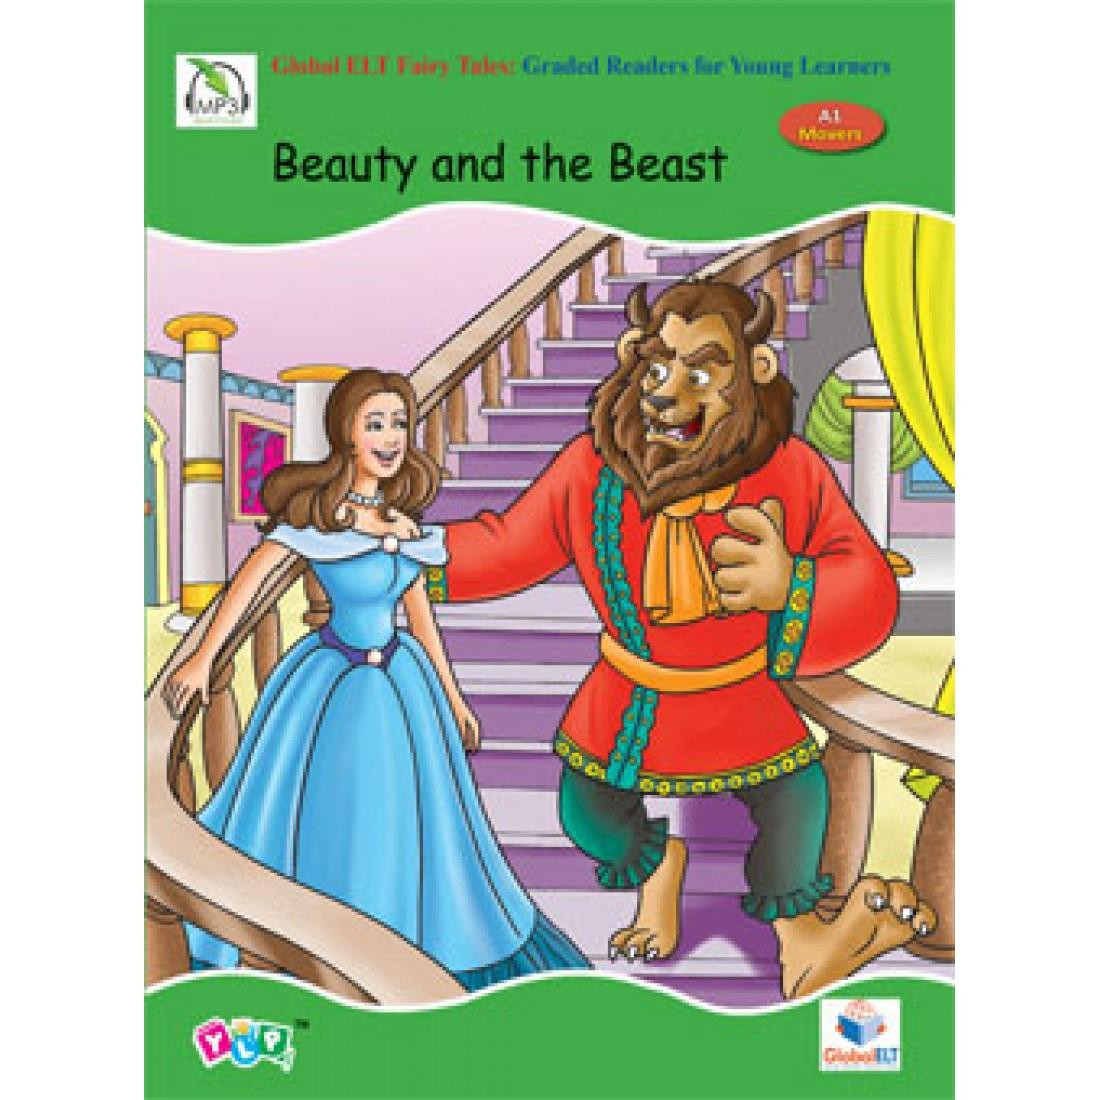 GEF : BEAUTY AND THE BEAST